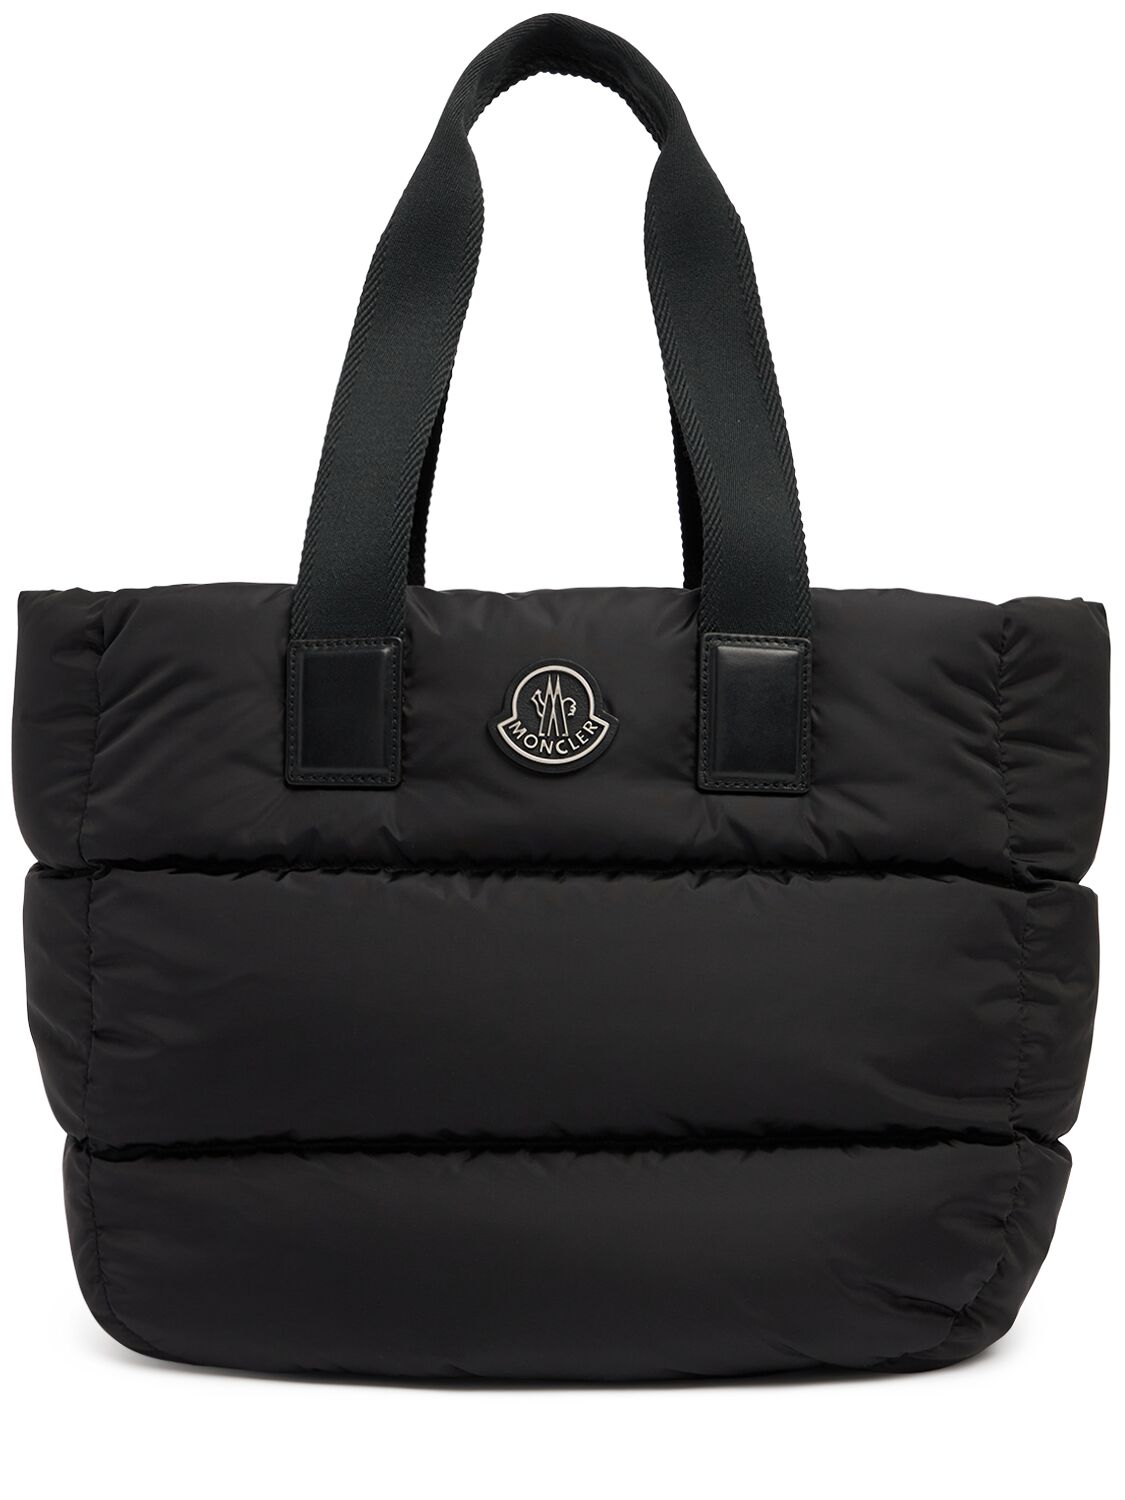 Caradoc Quilted Nylon Tote Bag